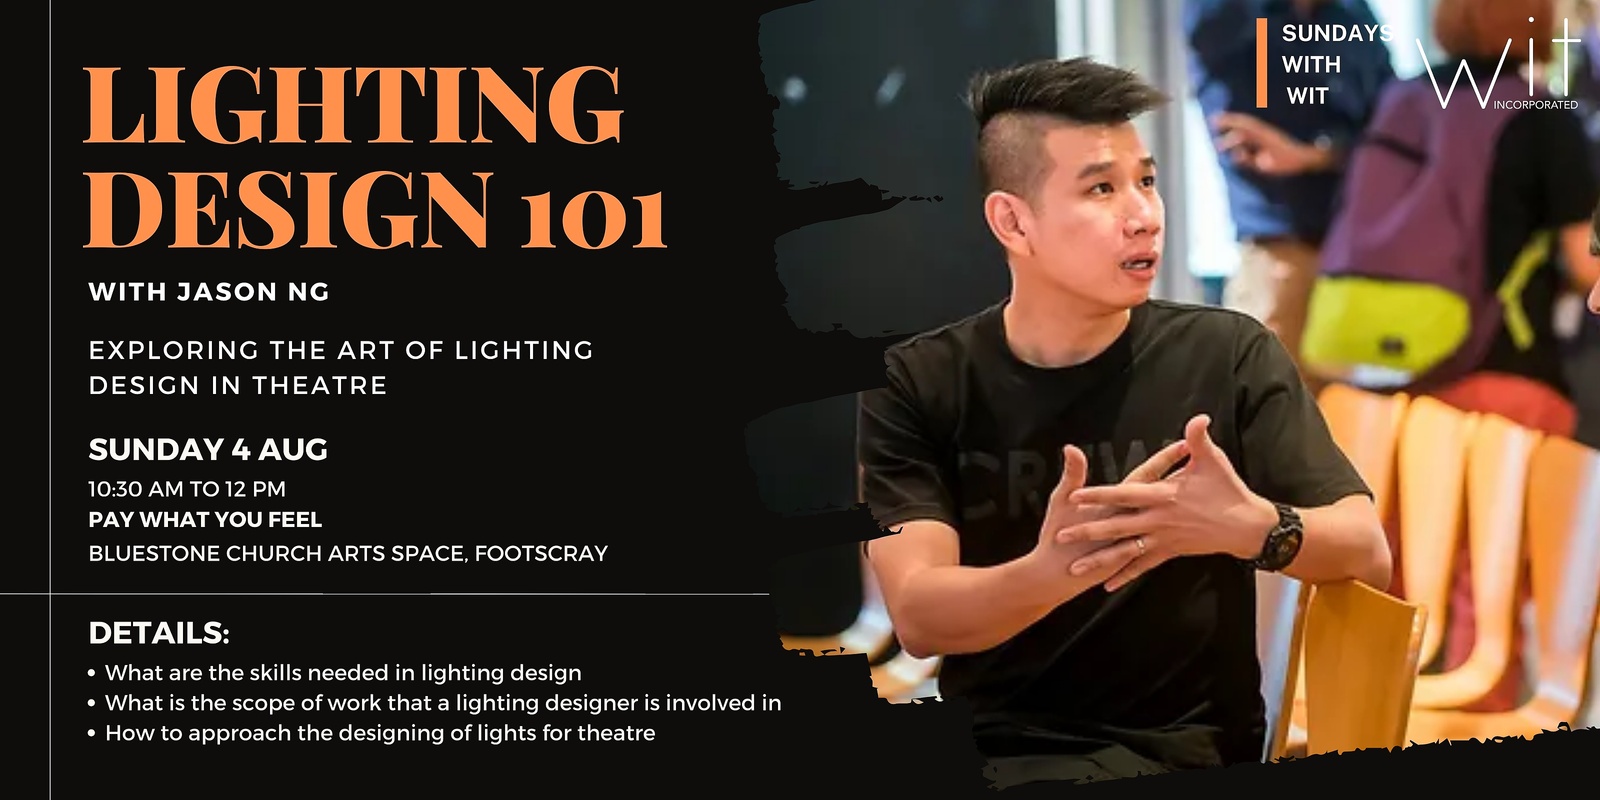 Banner image for Sundays with Wit - Lighting Design 101